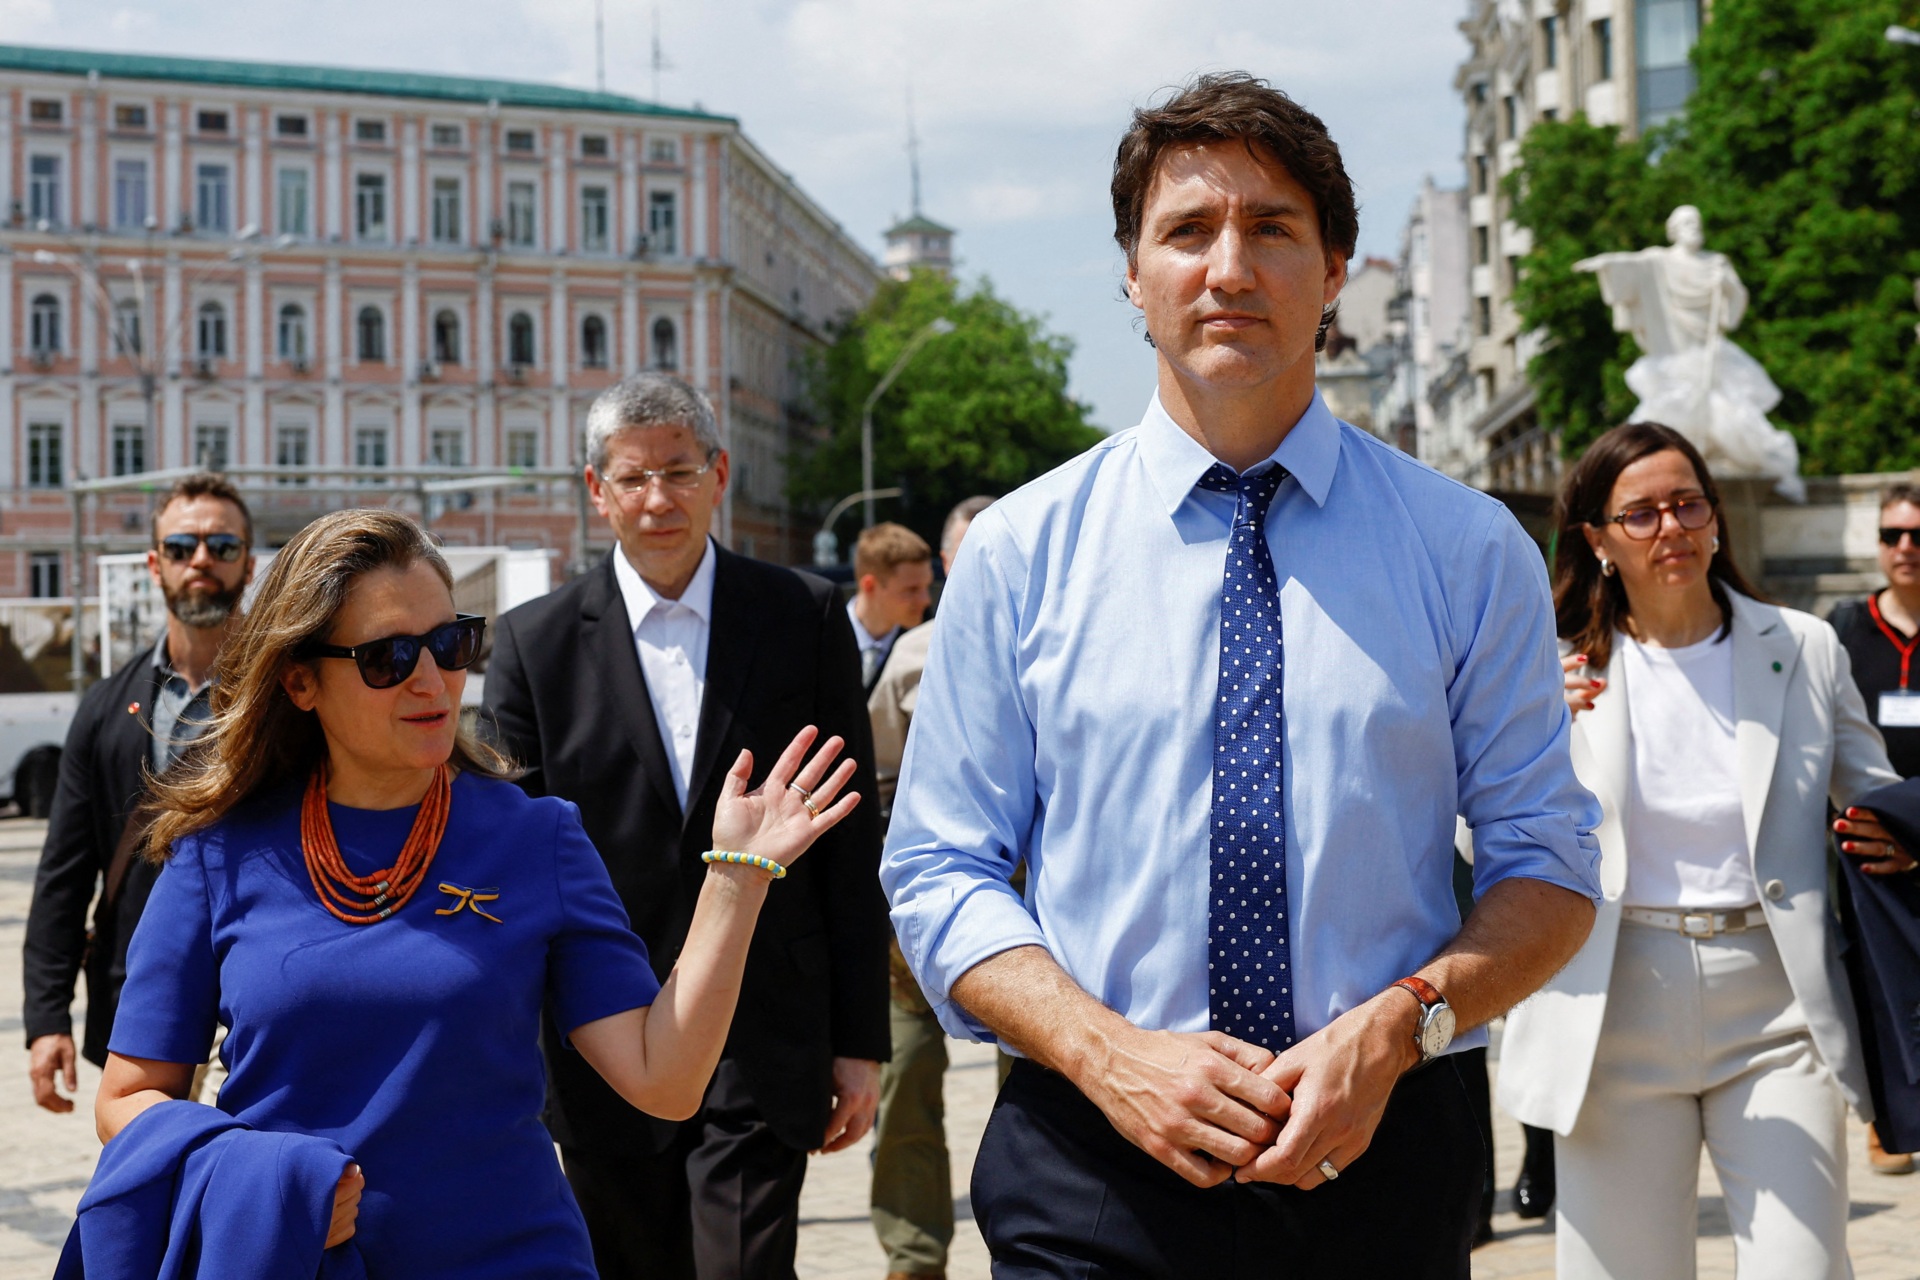 Canadian Prime Minister Justin Trudeau and Canada's Minister of Finance Chrystia Freeland (L) arrive to visit an exhibition of destroyed vehicles in Kyiv on June 10, 2023, amid Russia's invasion of Ukraine. (Photo by VALENTYN OGIRENKO / POOL / AFP) (Photo by VALENTYN OGIRENKO/POOL/AFP via Getty Images)